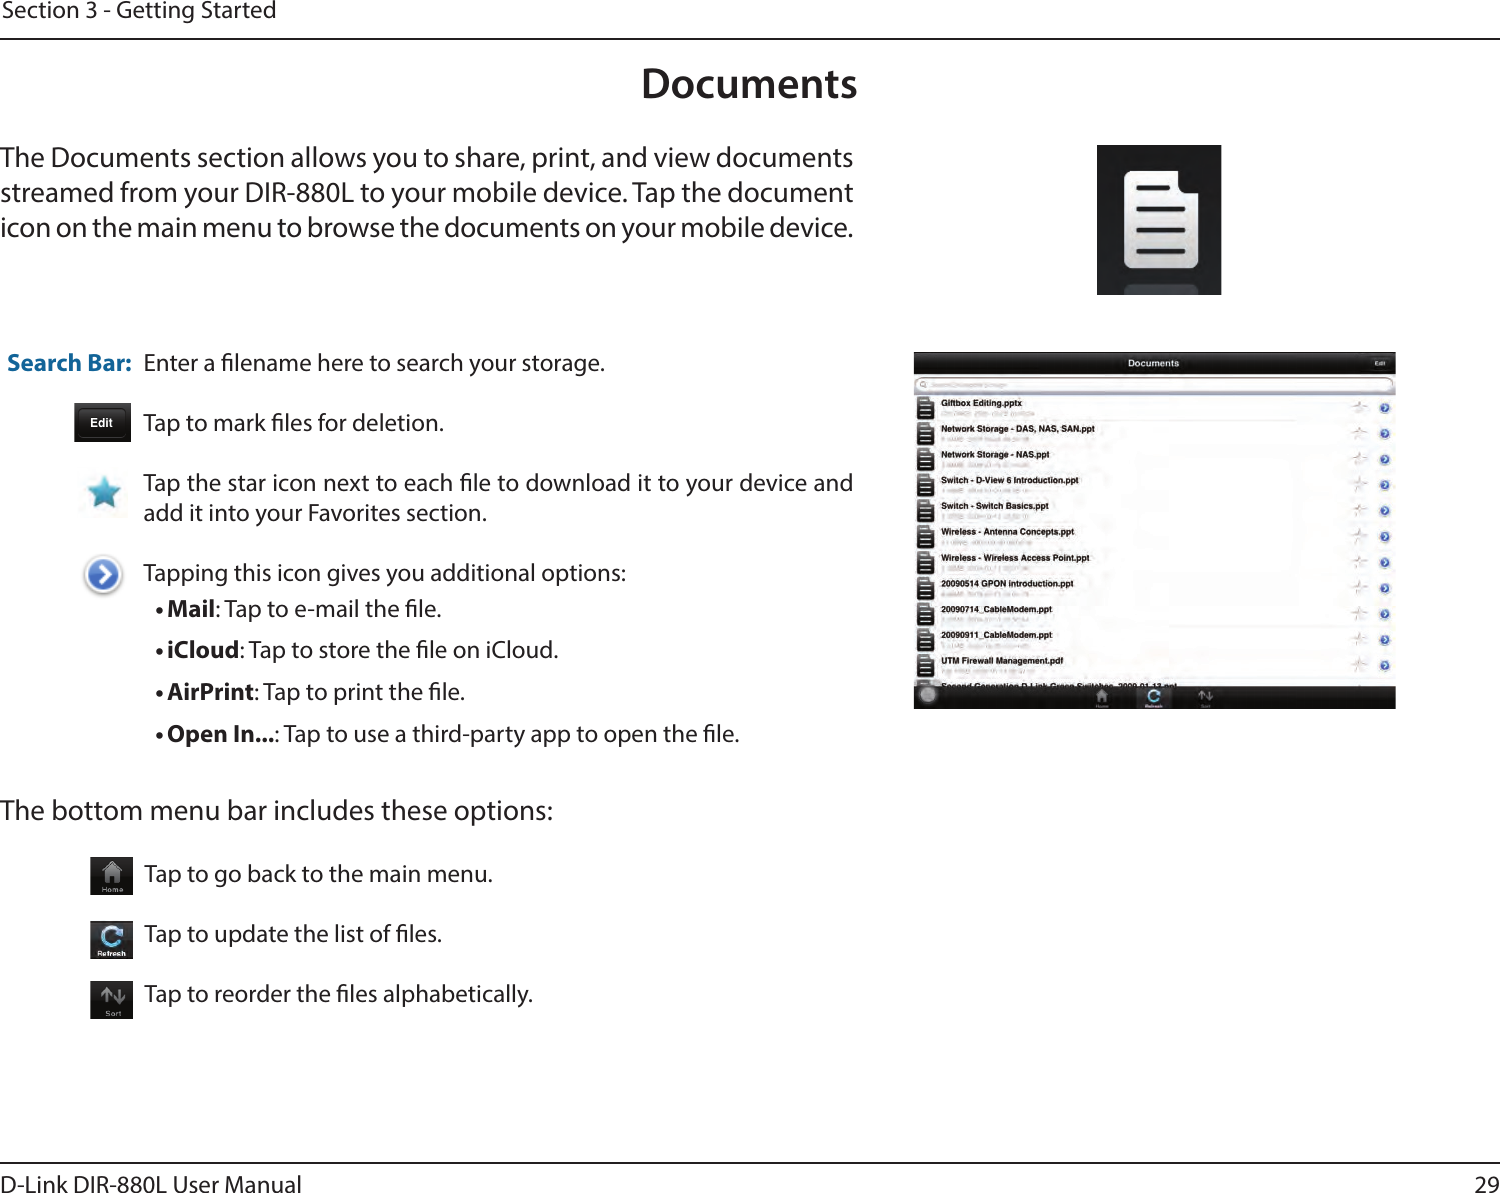 29D-Link DIR-880L User ManualSection 3 - Getting StartedDocumentsThe Documents section allows you to share, print, and view documents streamed from your DIR-880L to your mobile device. Tap the document icon on the main menu to browse the documents on your mobile device.Enter a lename here to search your storage.Tap to mark les for deletion.Tap the star icon next to each le to download it to your device and add it into your Favorites section.Tapping this icon gives you additional options:• Mail: Tap to e-mail the le.• iCloud: Tap to store the le on iCloud.• AirPrint: Tap to print the le.• Open In...: Tap to use a third-party app to open the le.The bottom menu bar includes these options:Search Bar: Tap to go back to the main menu.Tap to update the list of les.Tap to reorder the les alphabetically.